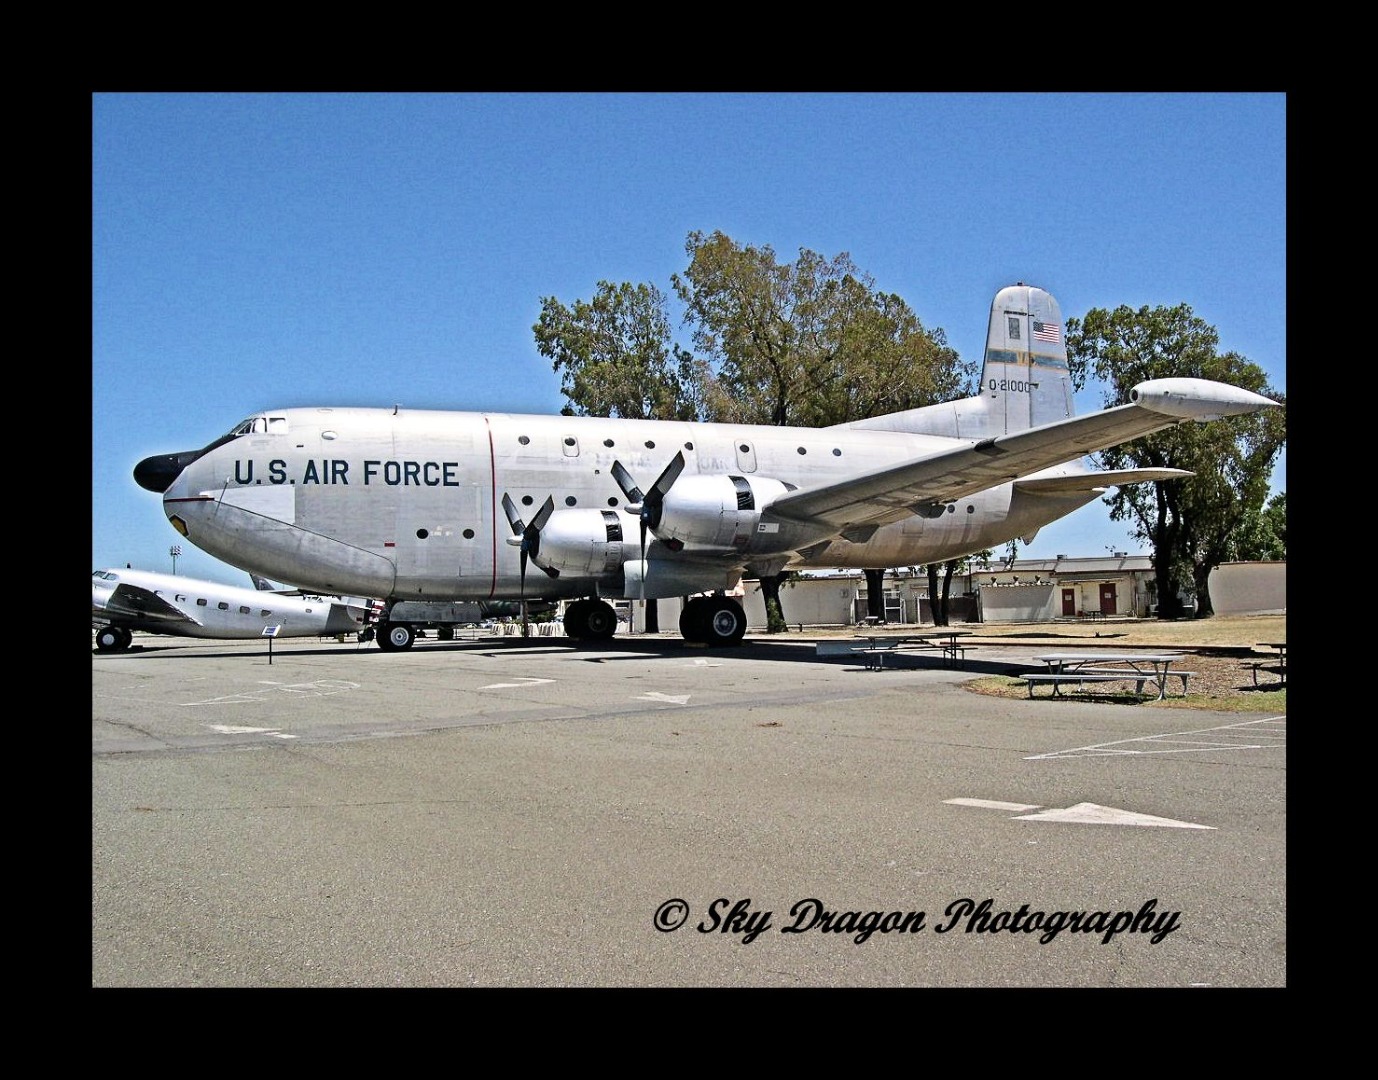 A USAF C-124 Globemaster II with 53 crewmembers and troops crashed, all military members survived the crash and then vanished!